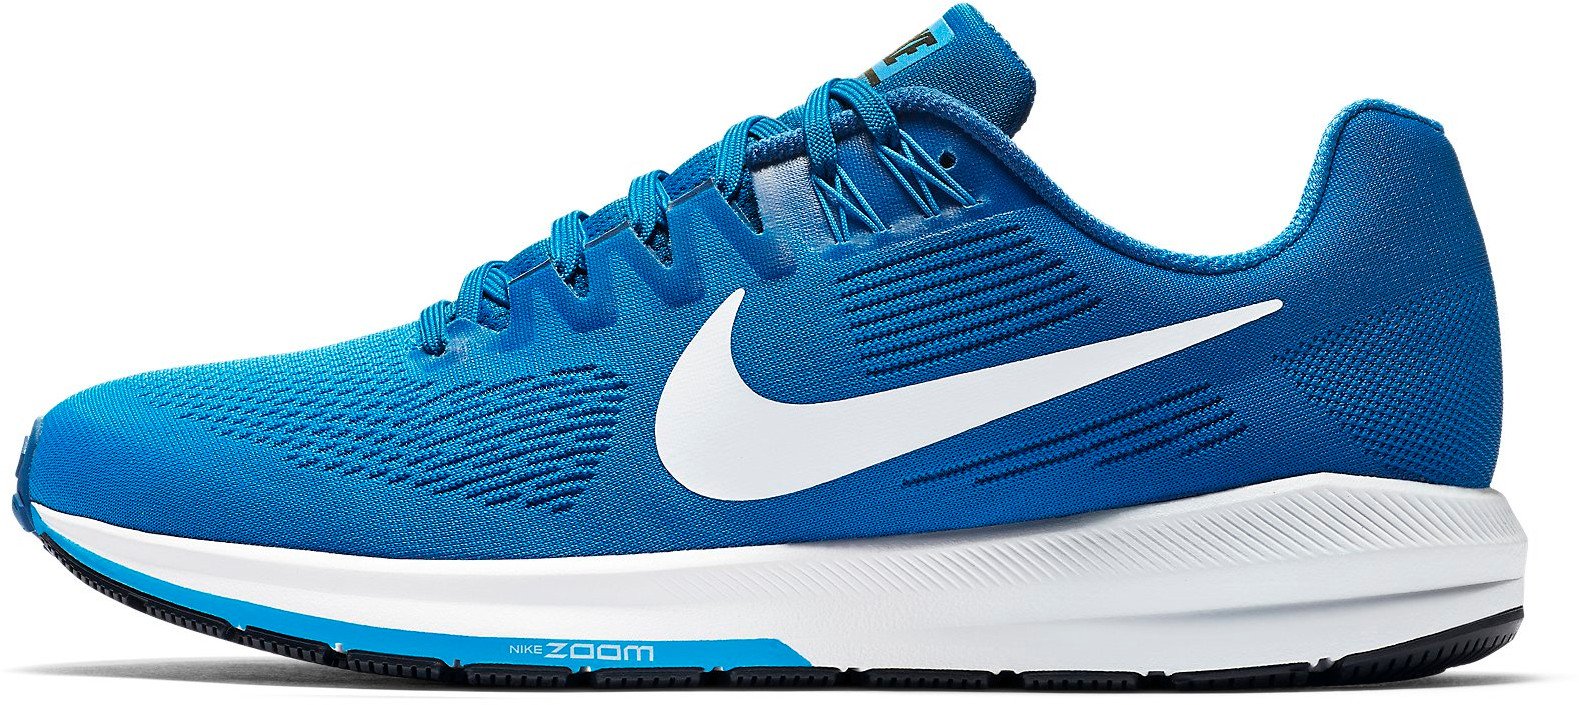 Running shoes Nike AIR ZOOM STRUCTURE 21 -